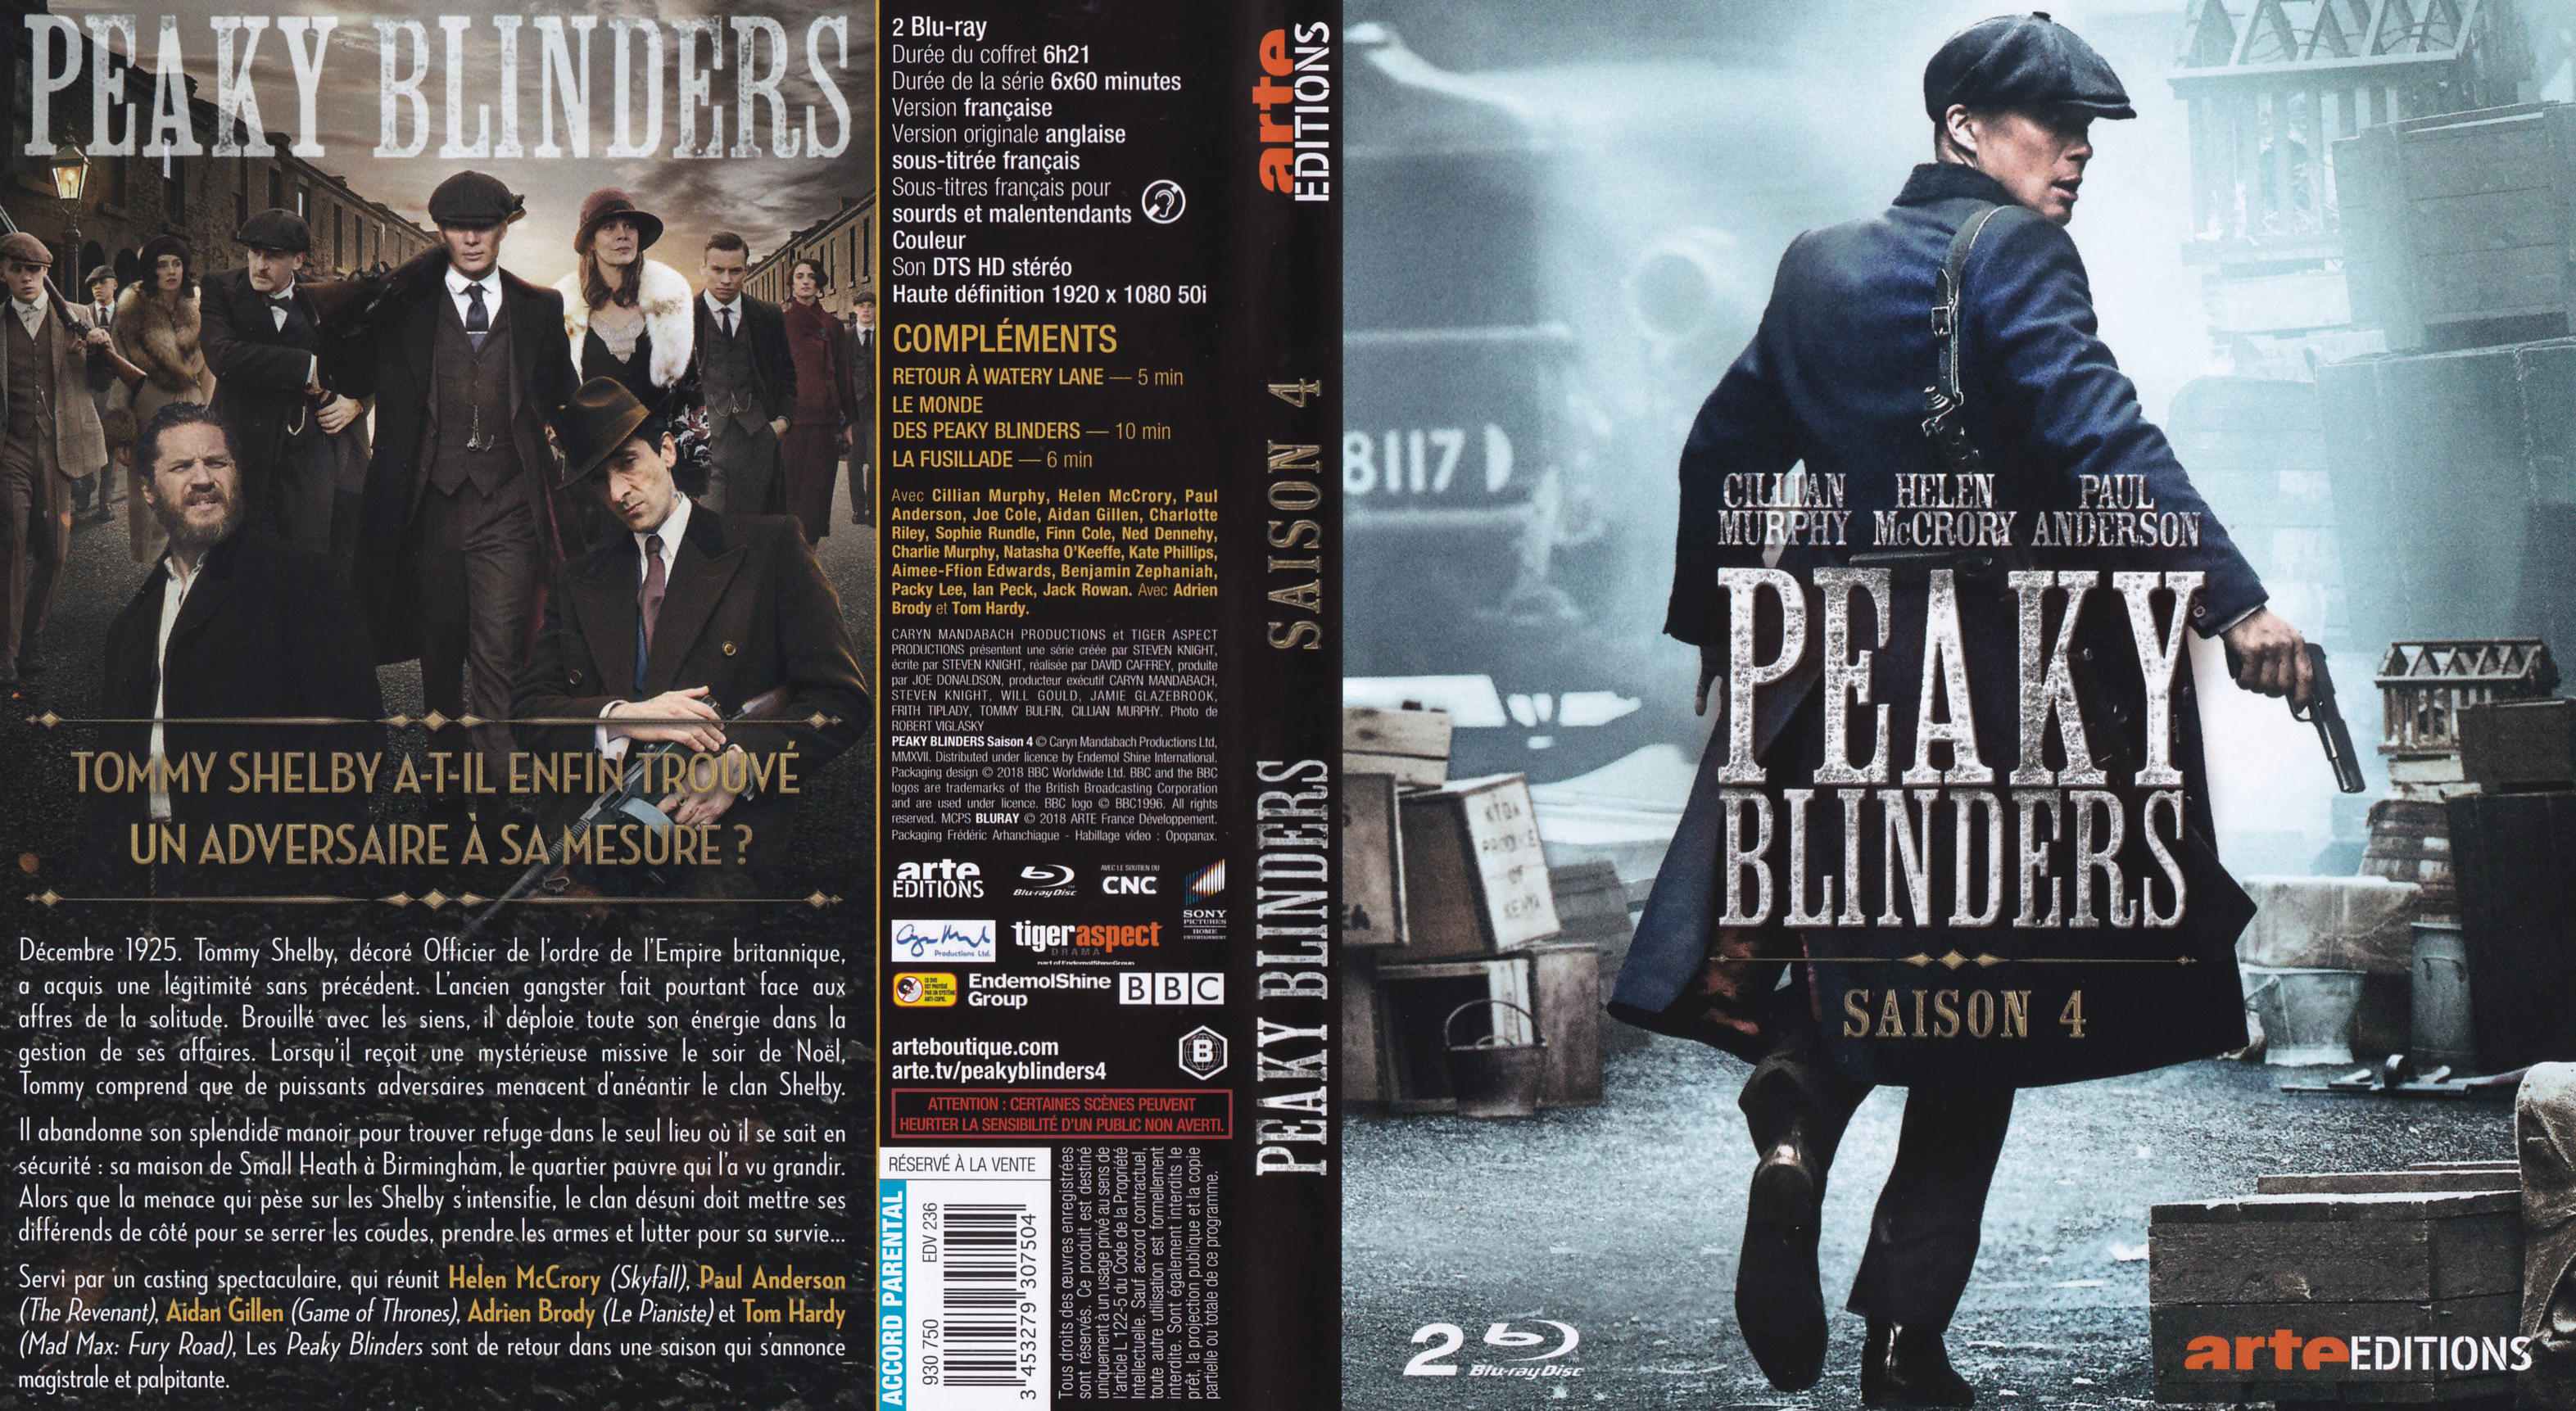 Jaquette DVD Peaky blinders Saison 4 (BLU-RAY)